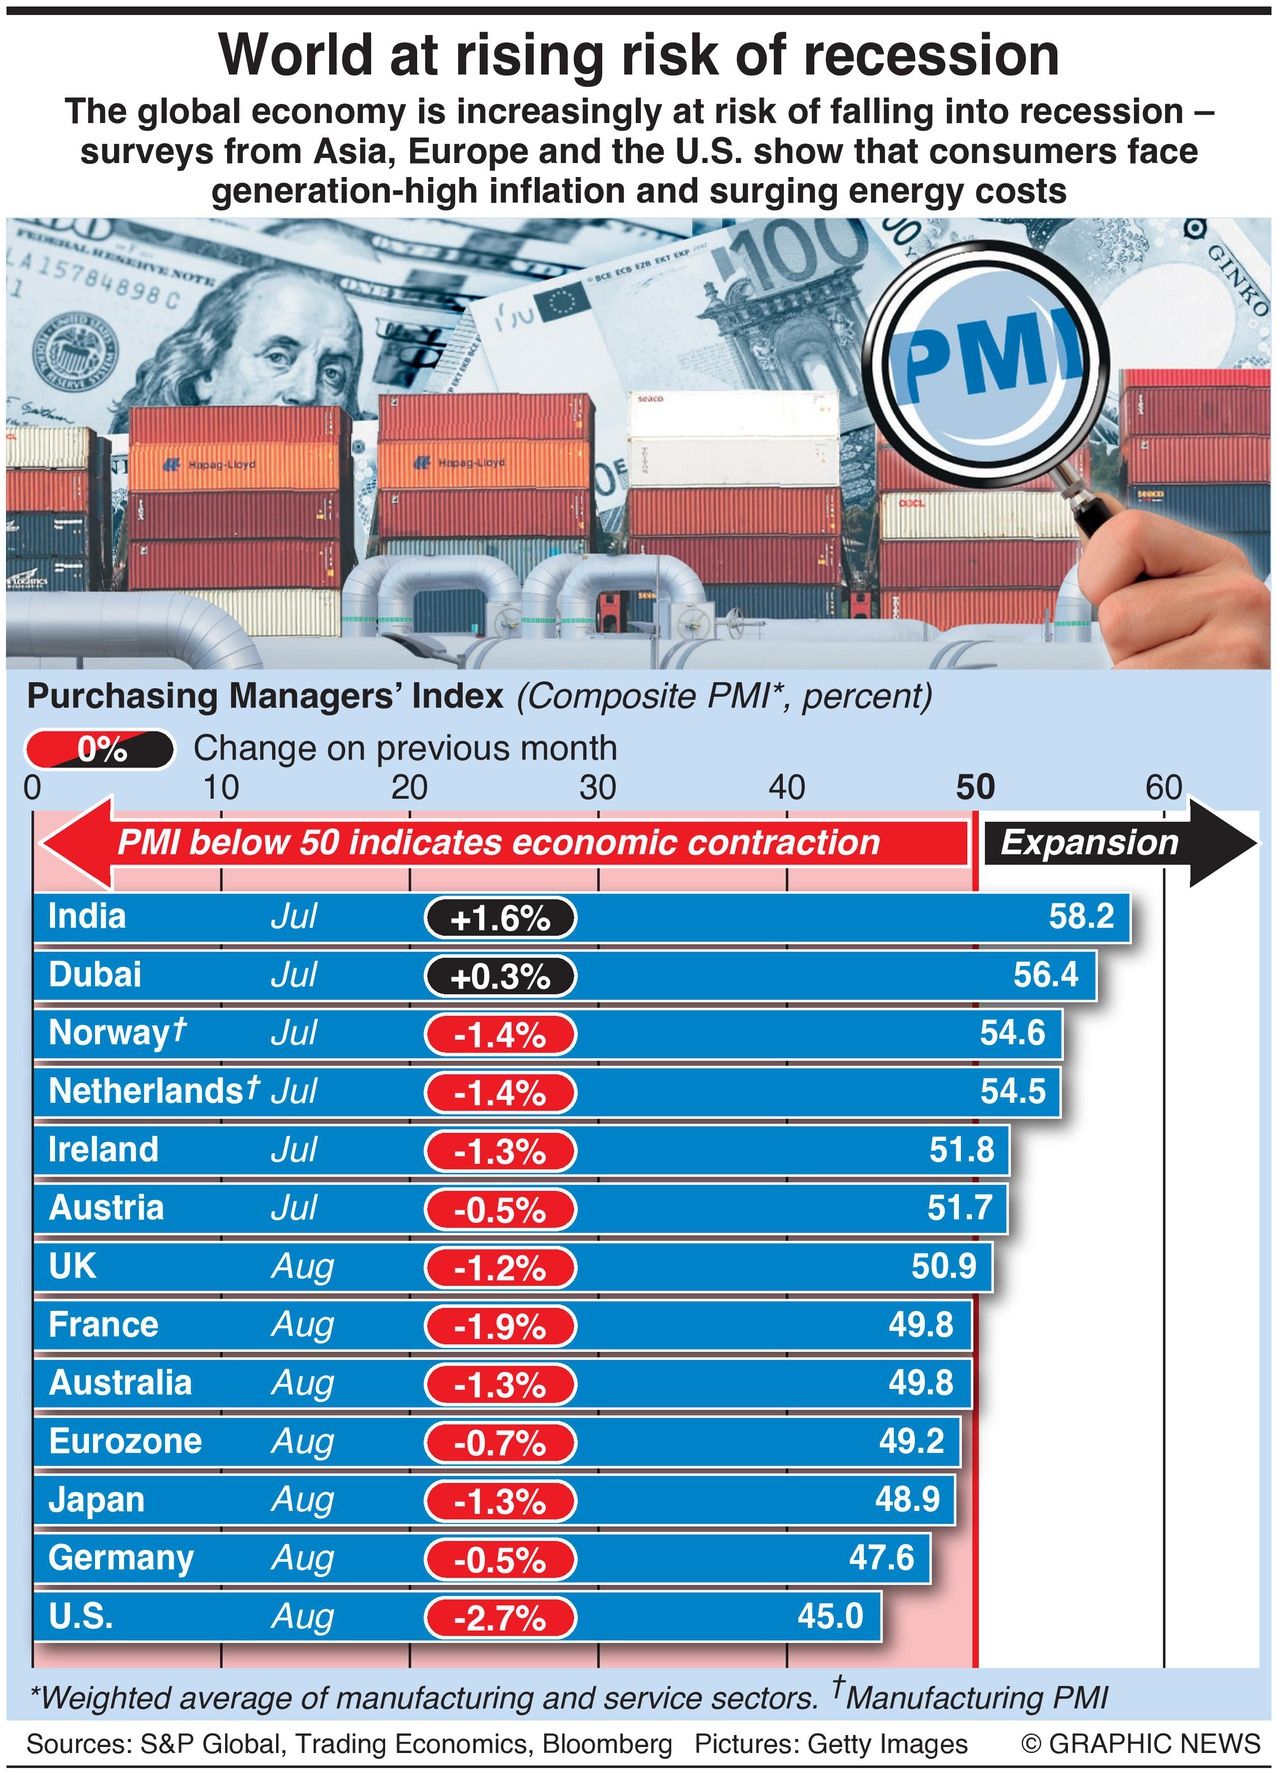 Purchasing manager's index showing world is facing a recession